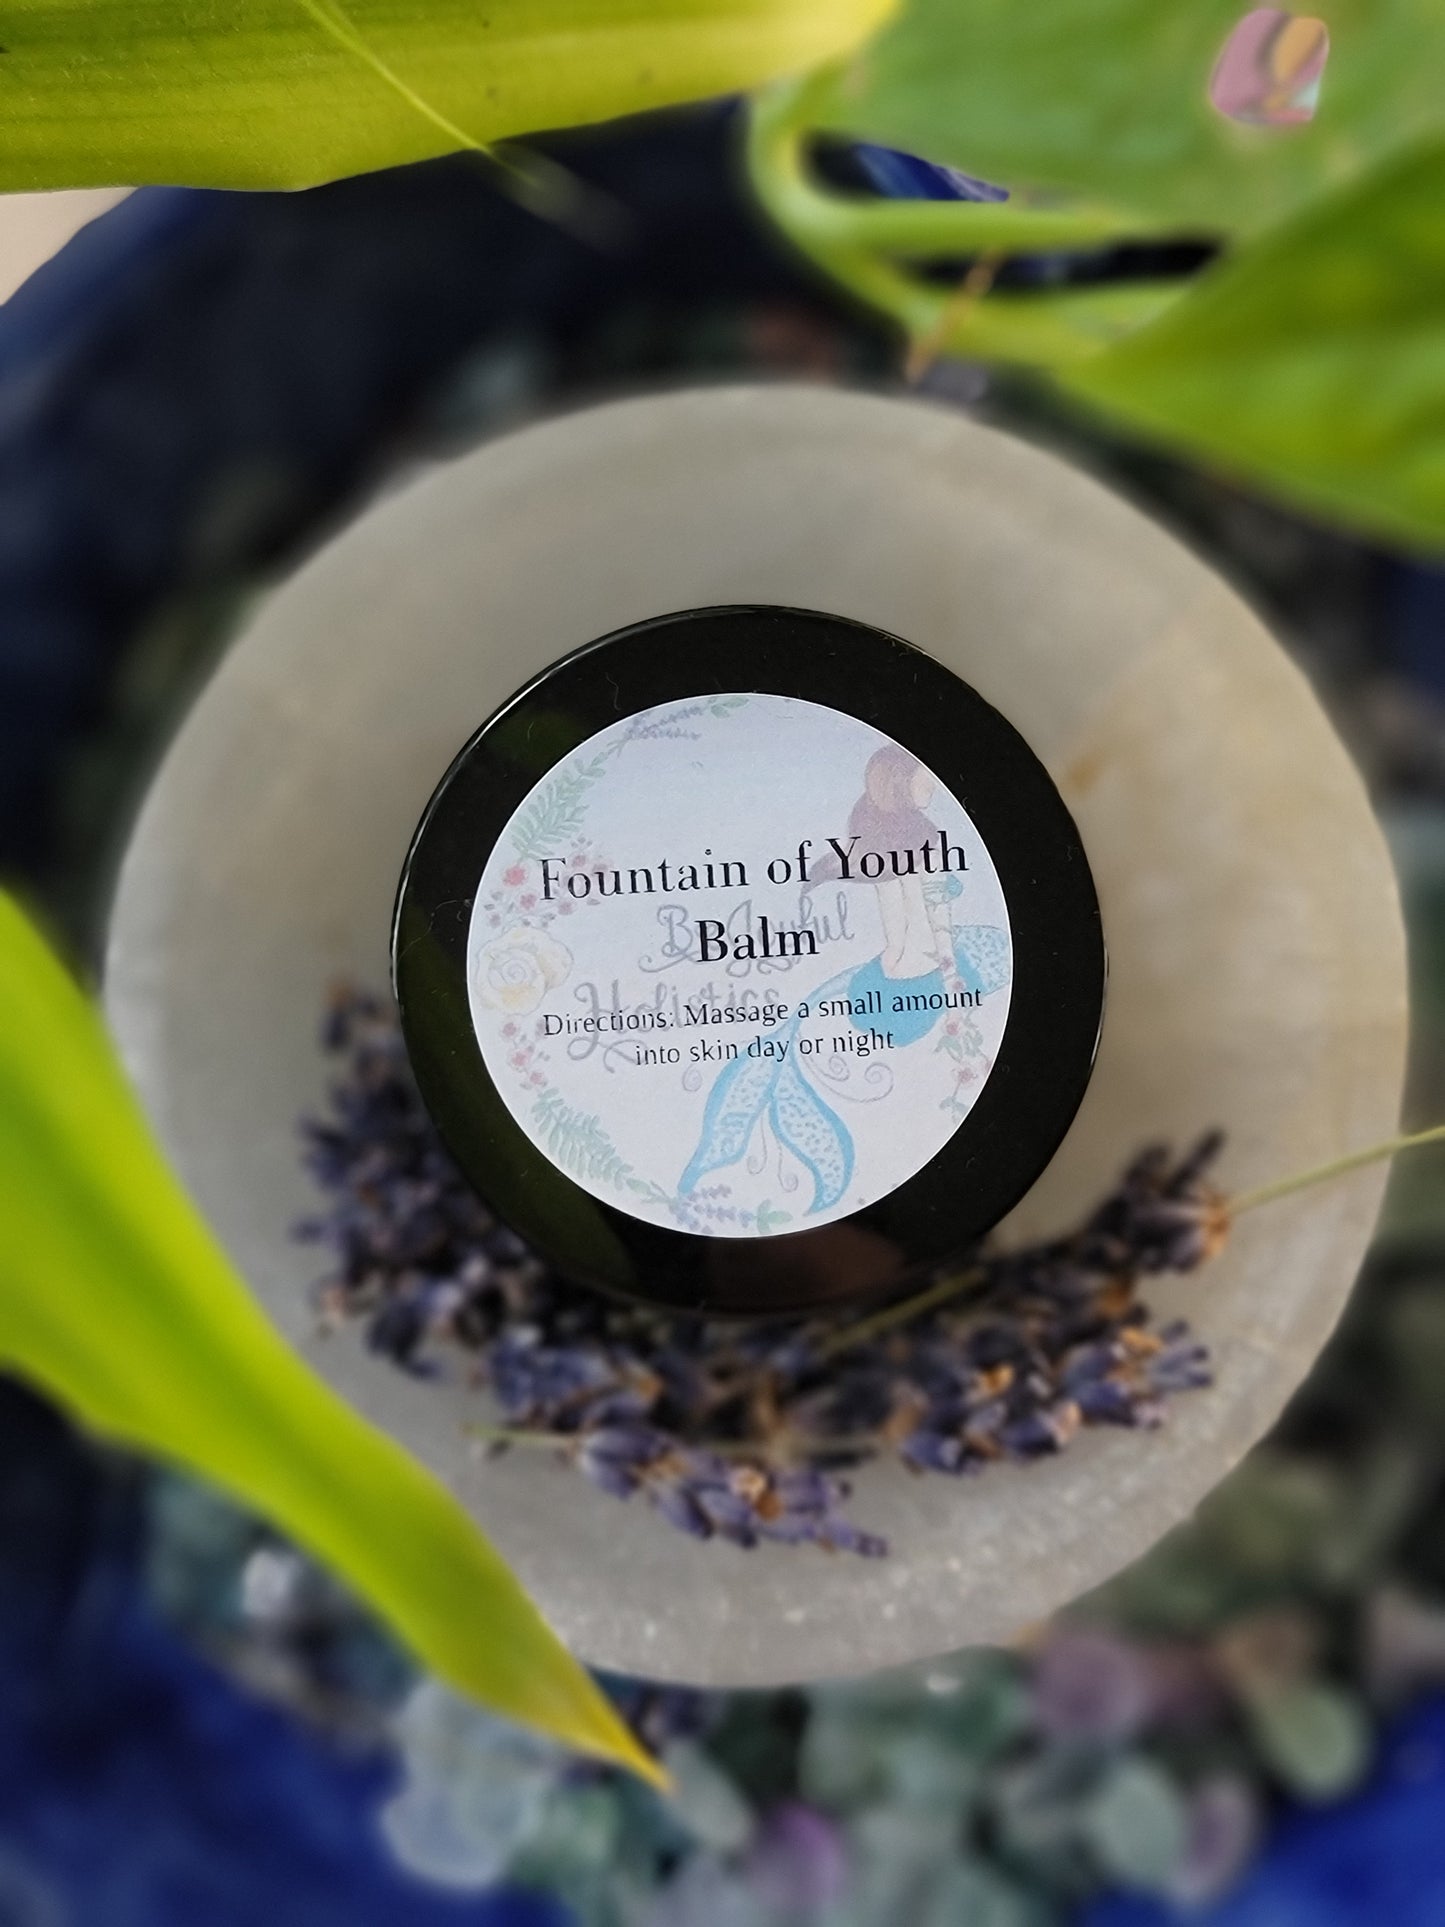 Fountain of Youth Balm